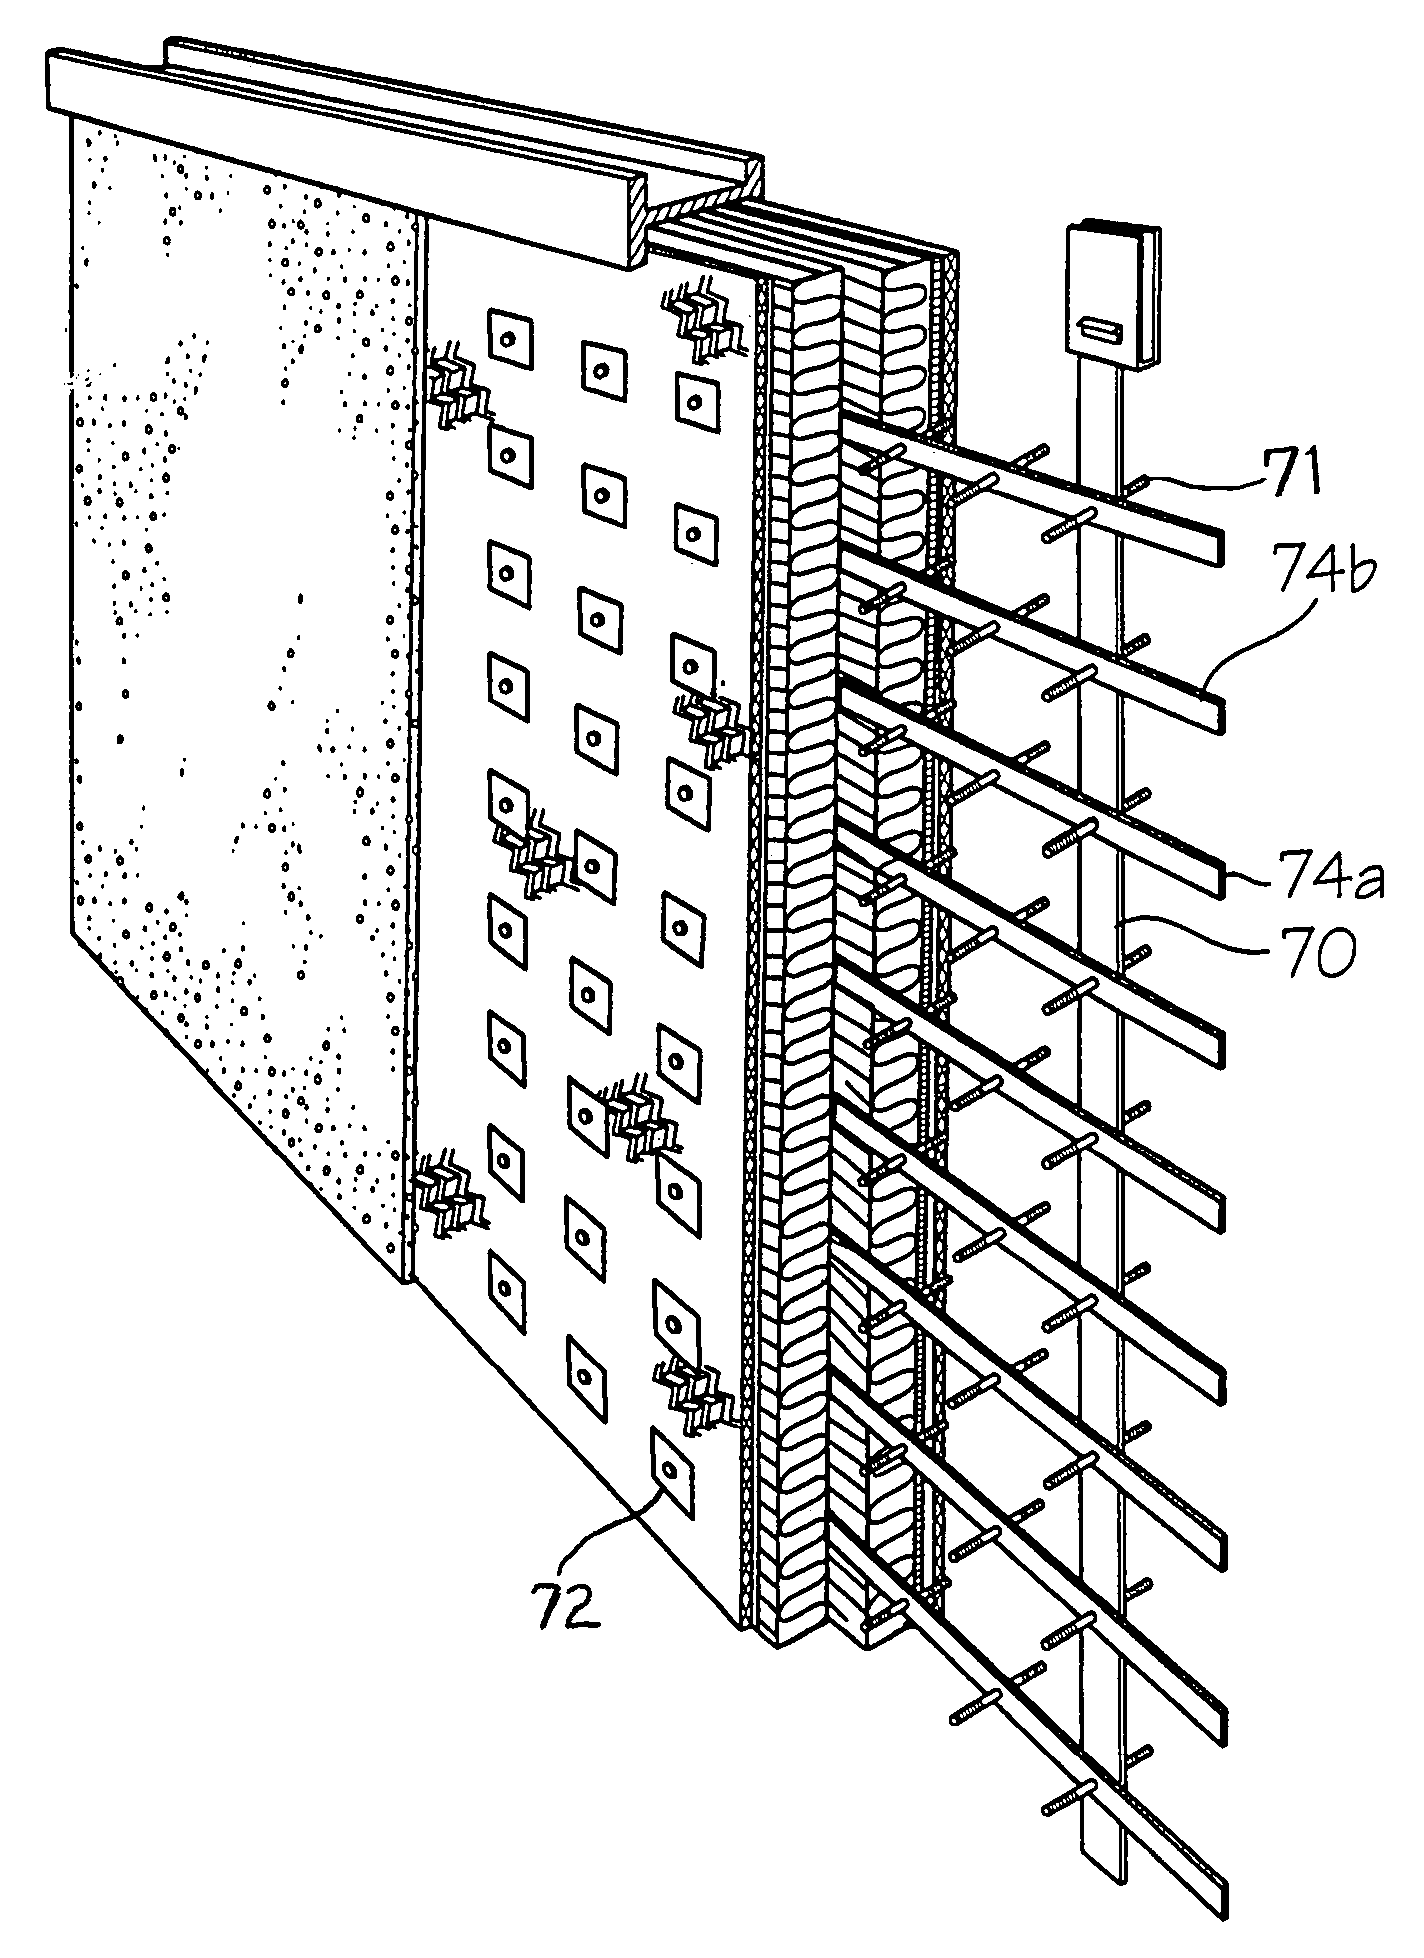 Seal and method for high temperature sealing